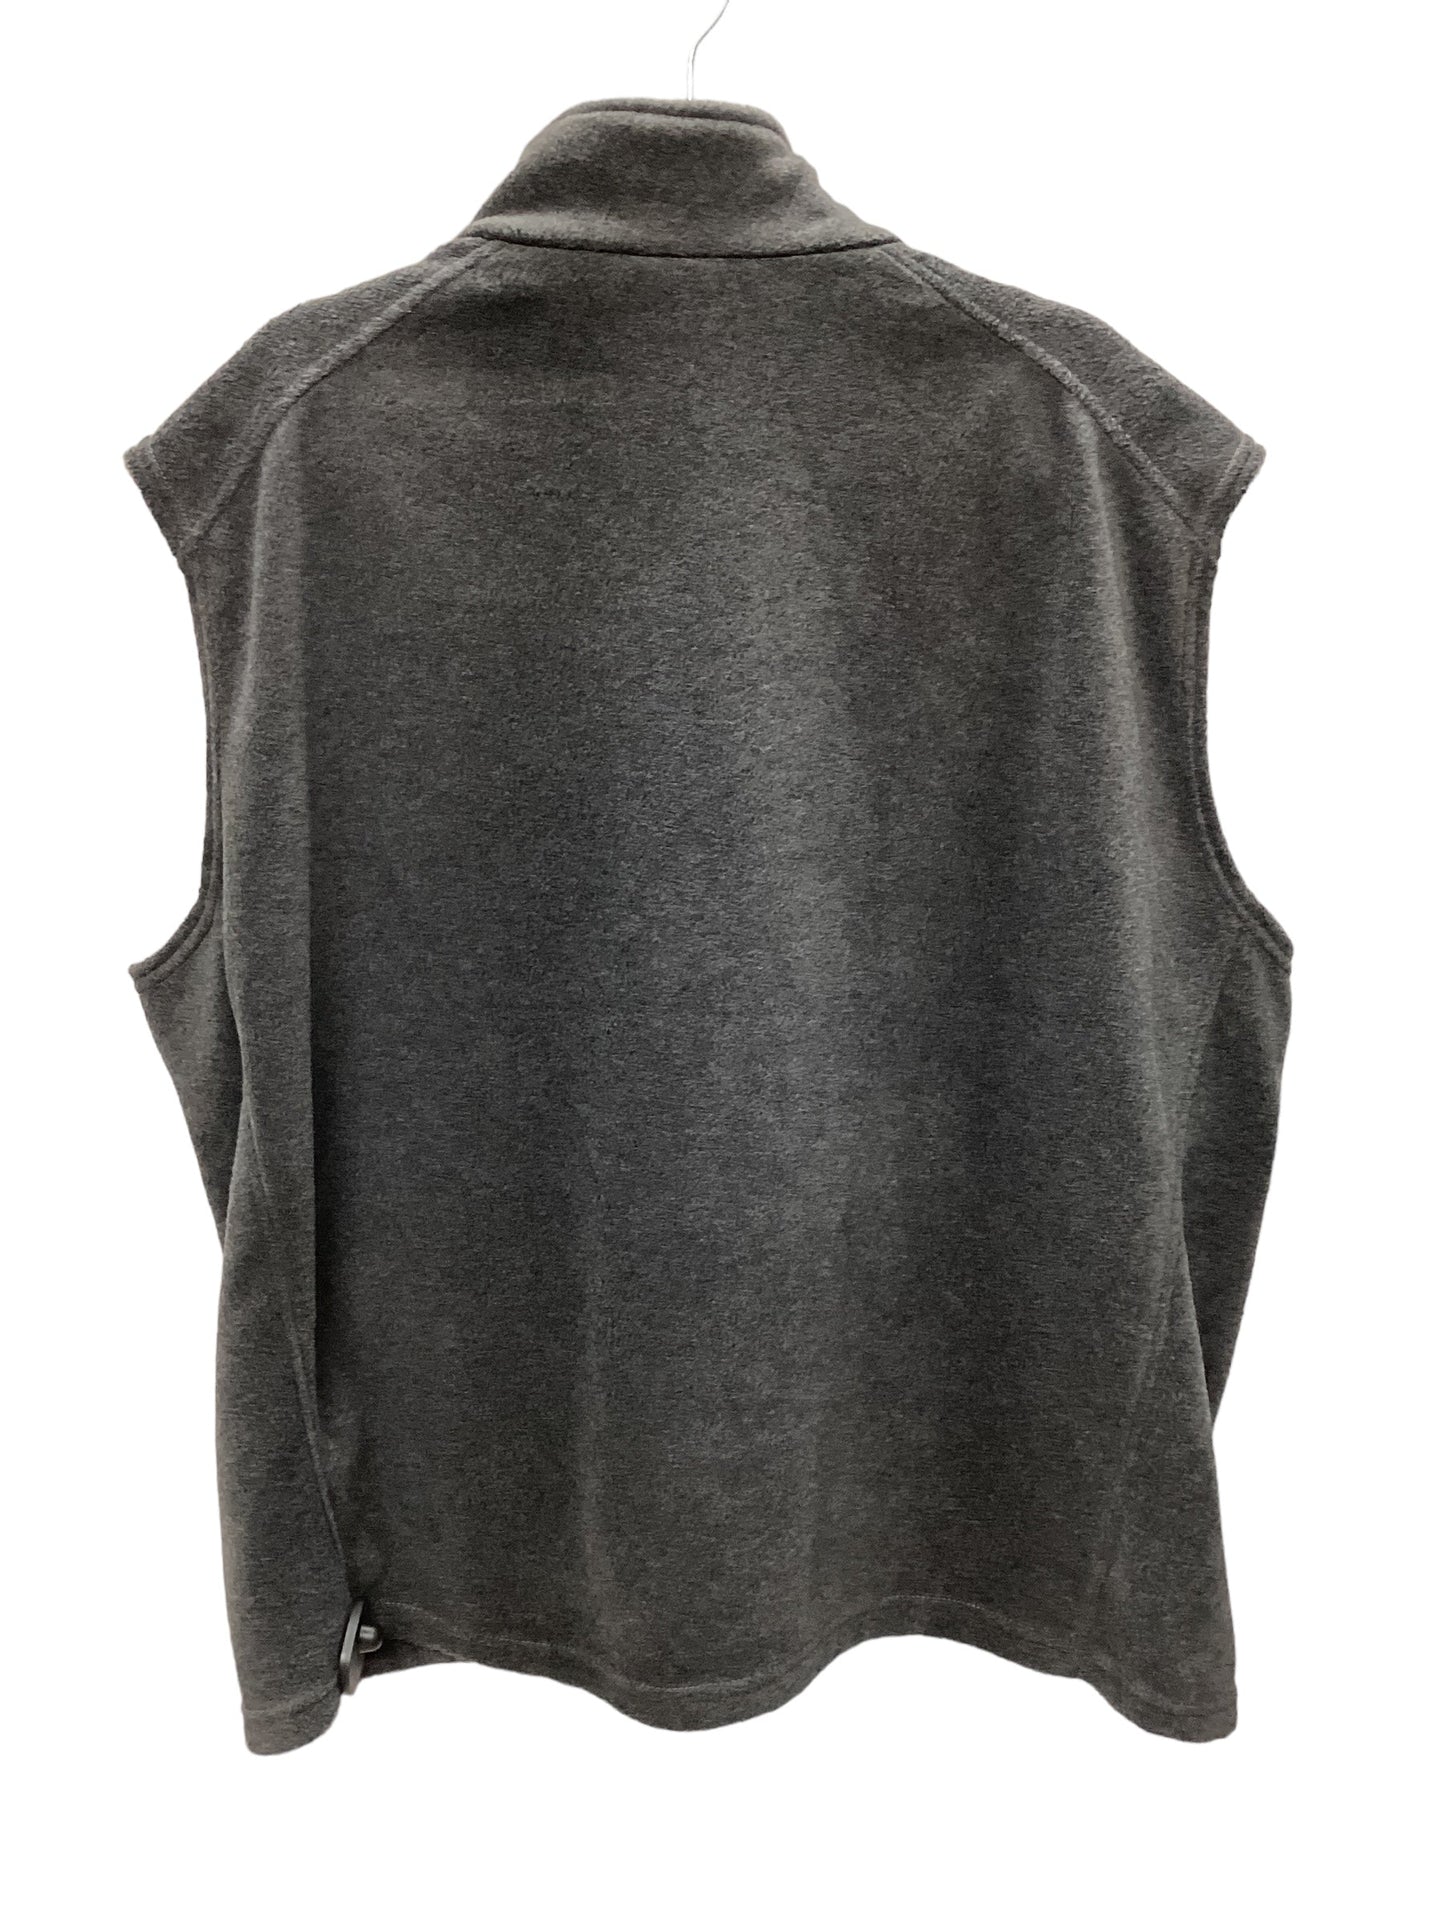 Vest Other By Columbia  Size: 2x